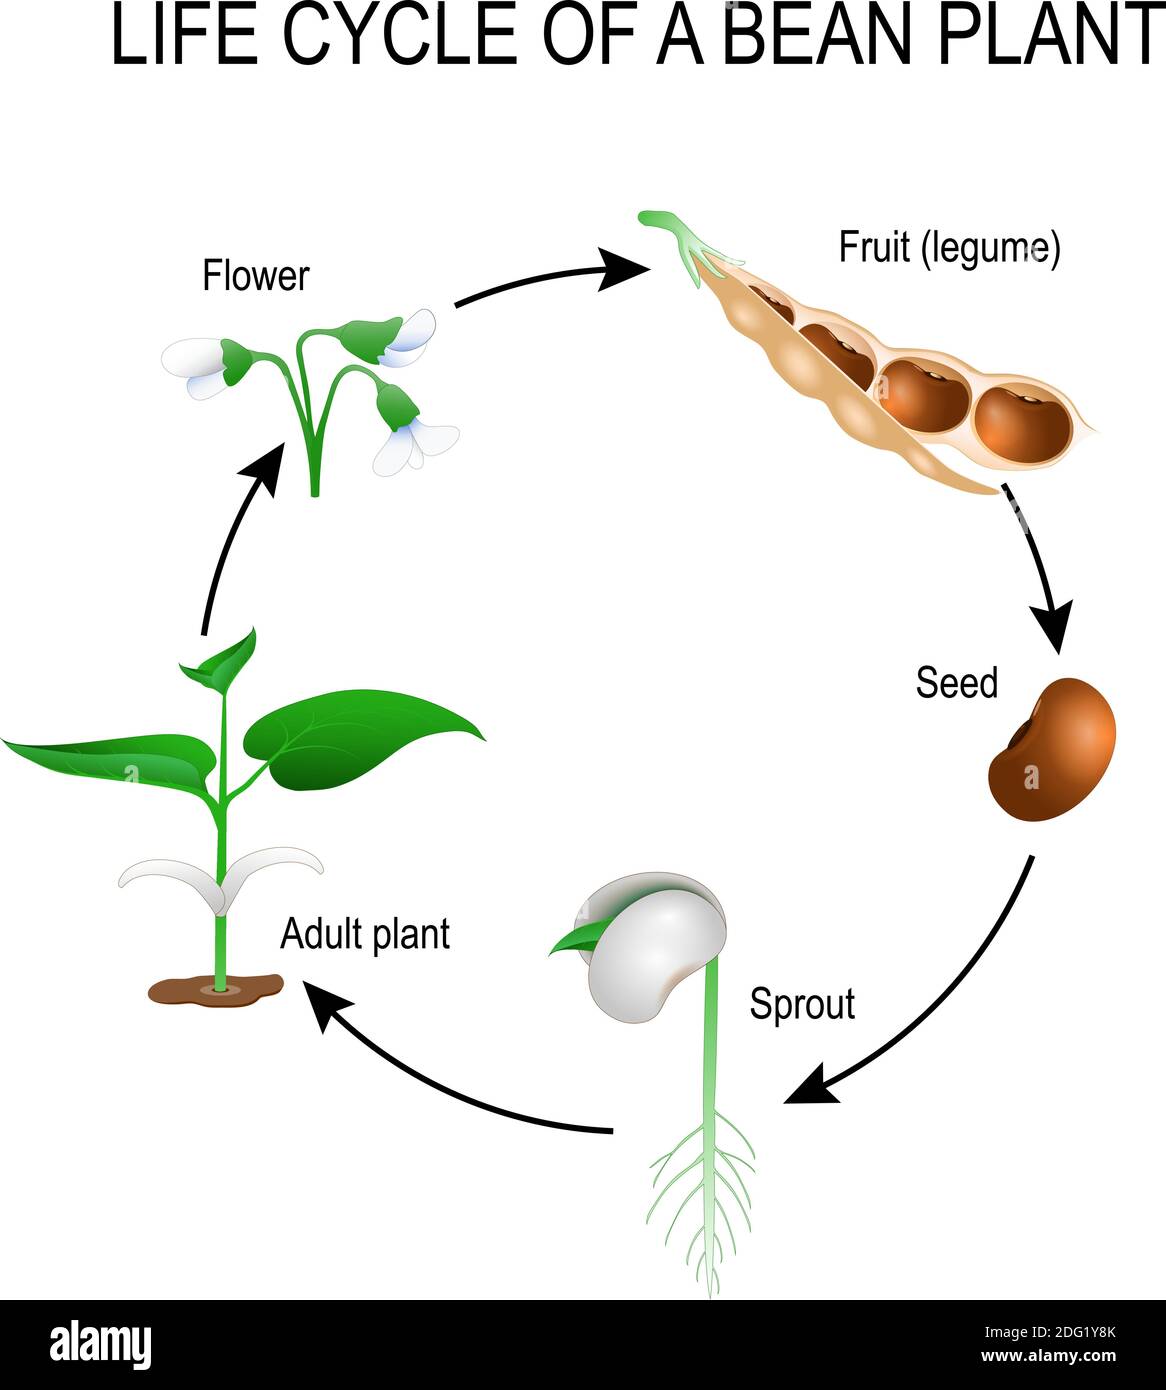 Life Cycle Of Plant With Seeds Growth In Biological Labeled Outline ...